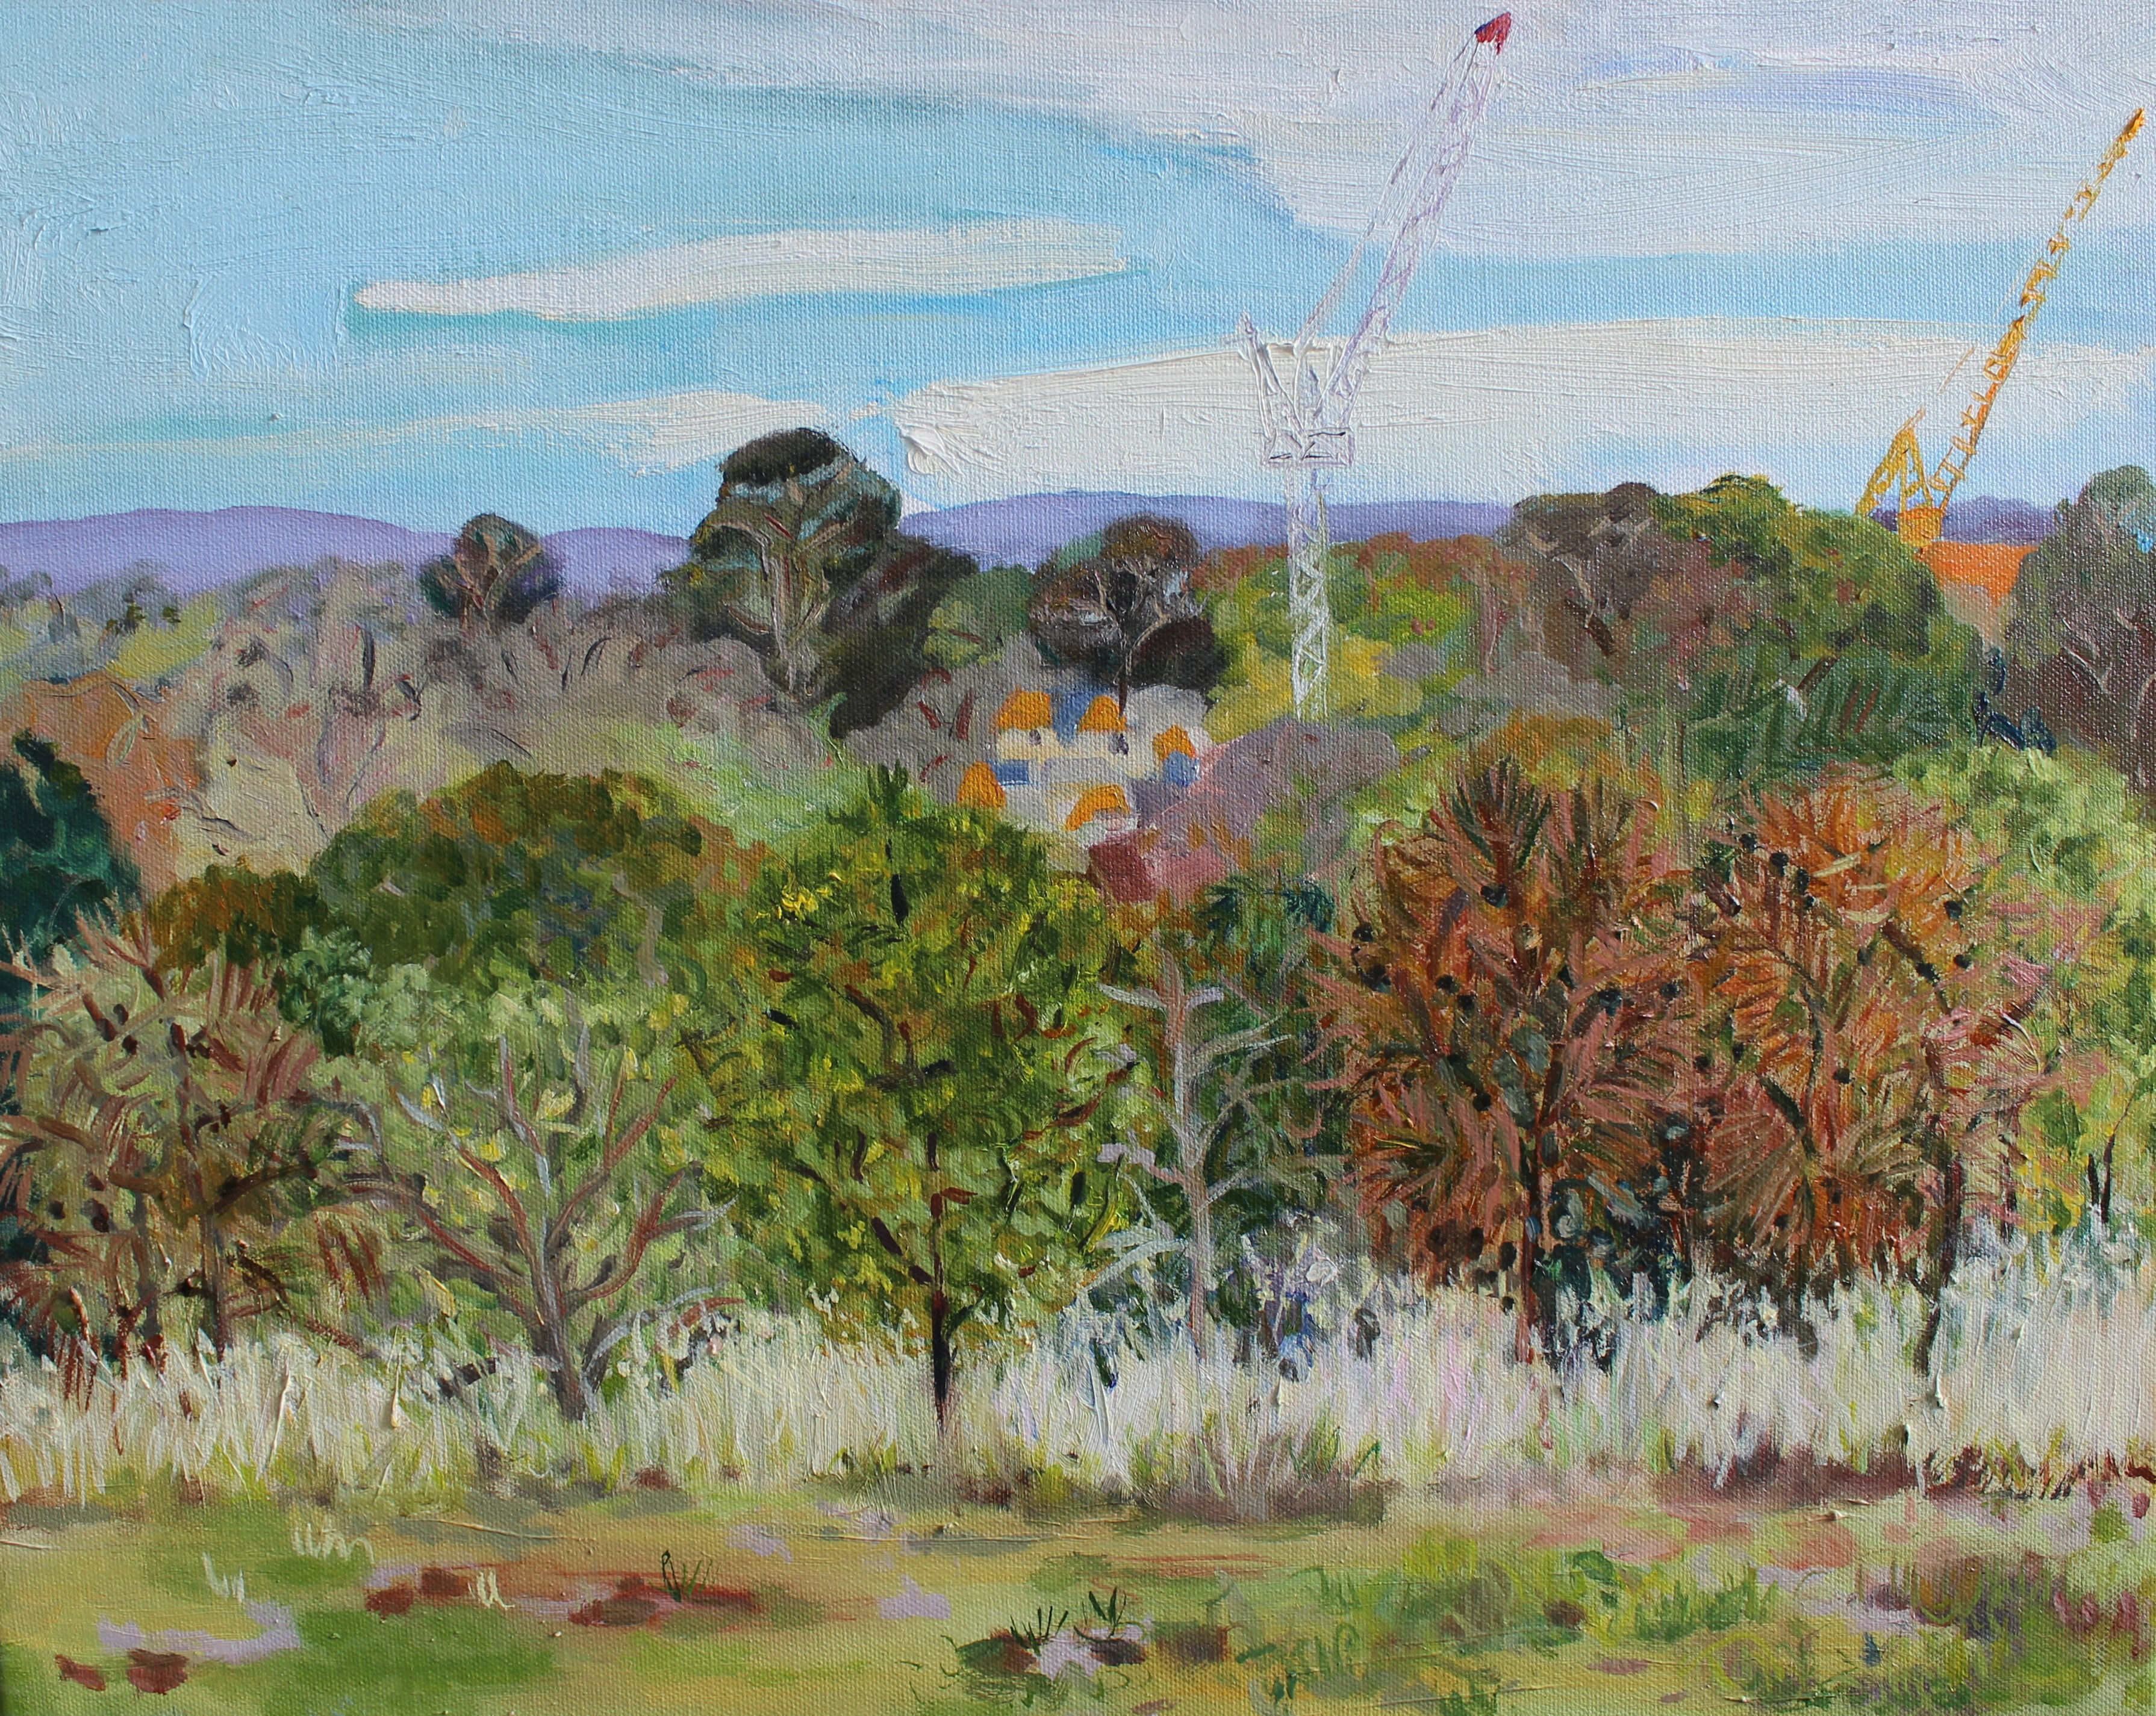 Justine Siedle 51 x 40.5 cm .JPG A new world emerges while an old world dissappears. On the Hilll in Kew 1